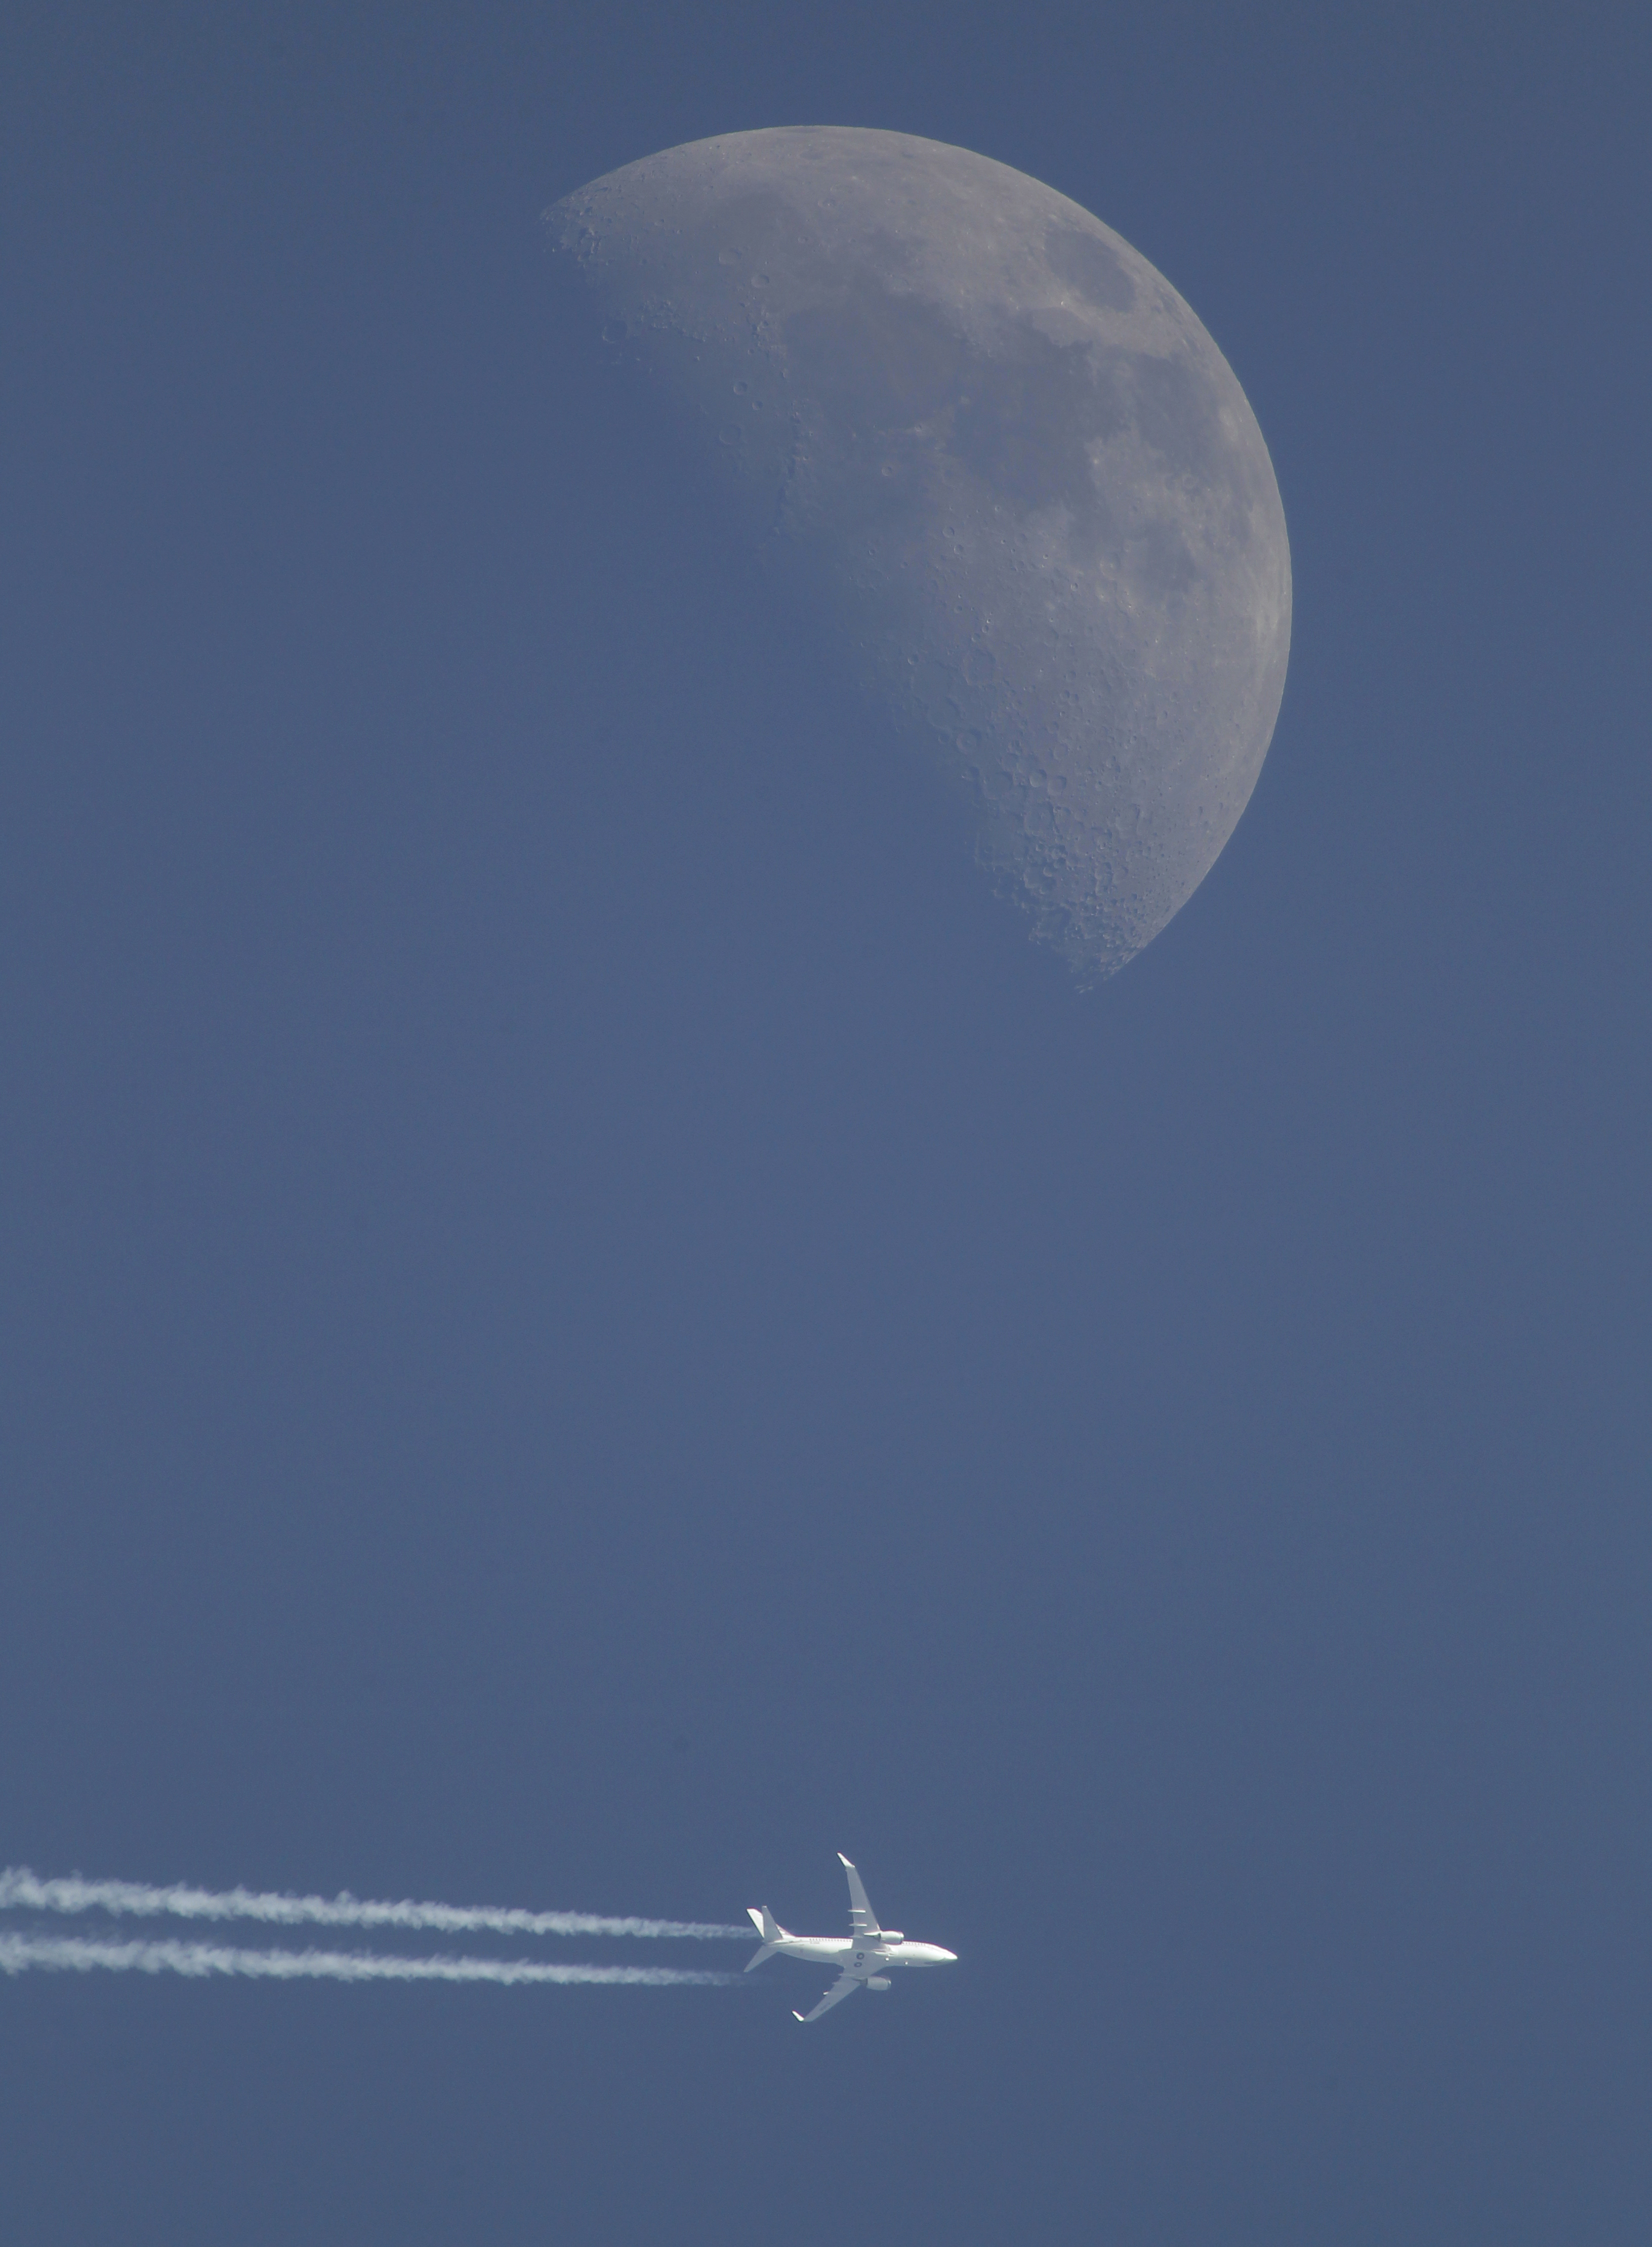 A jet airplane leaves a trail in the sky Sunday evening, April 29, 2012, over Novogrudok, 150 kilometers (93 miles) west of the capital Minsk, Belarus. The waxing crescent moon will be full May 6. (AP Photo/Sergei Grits)